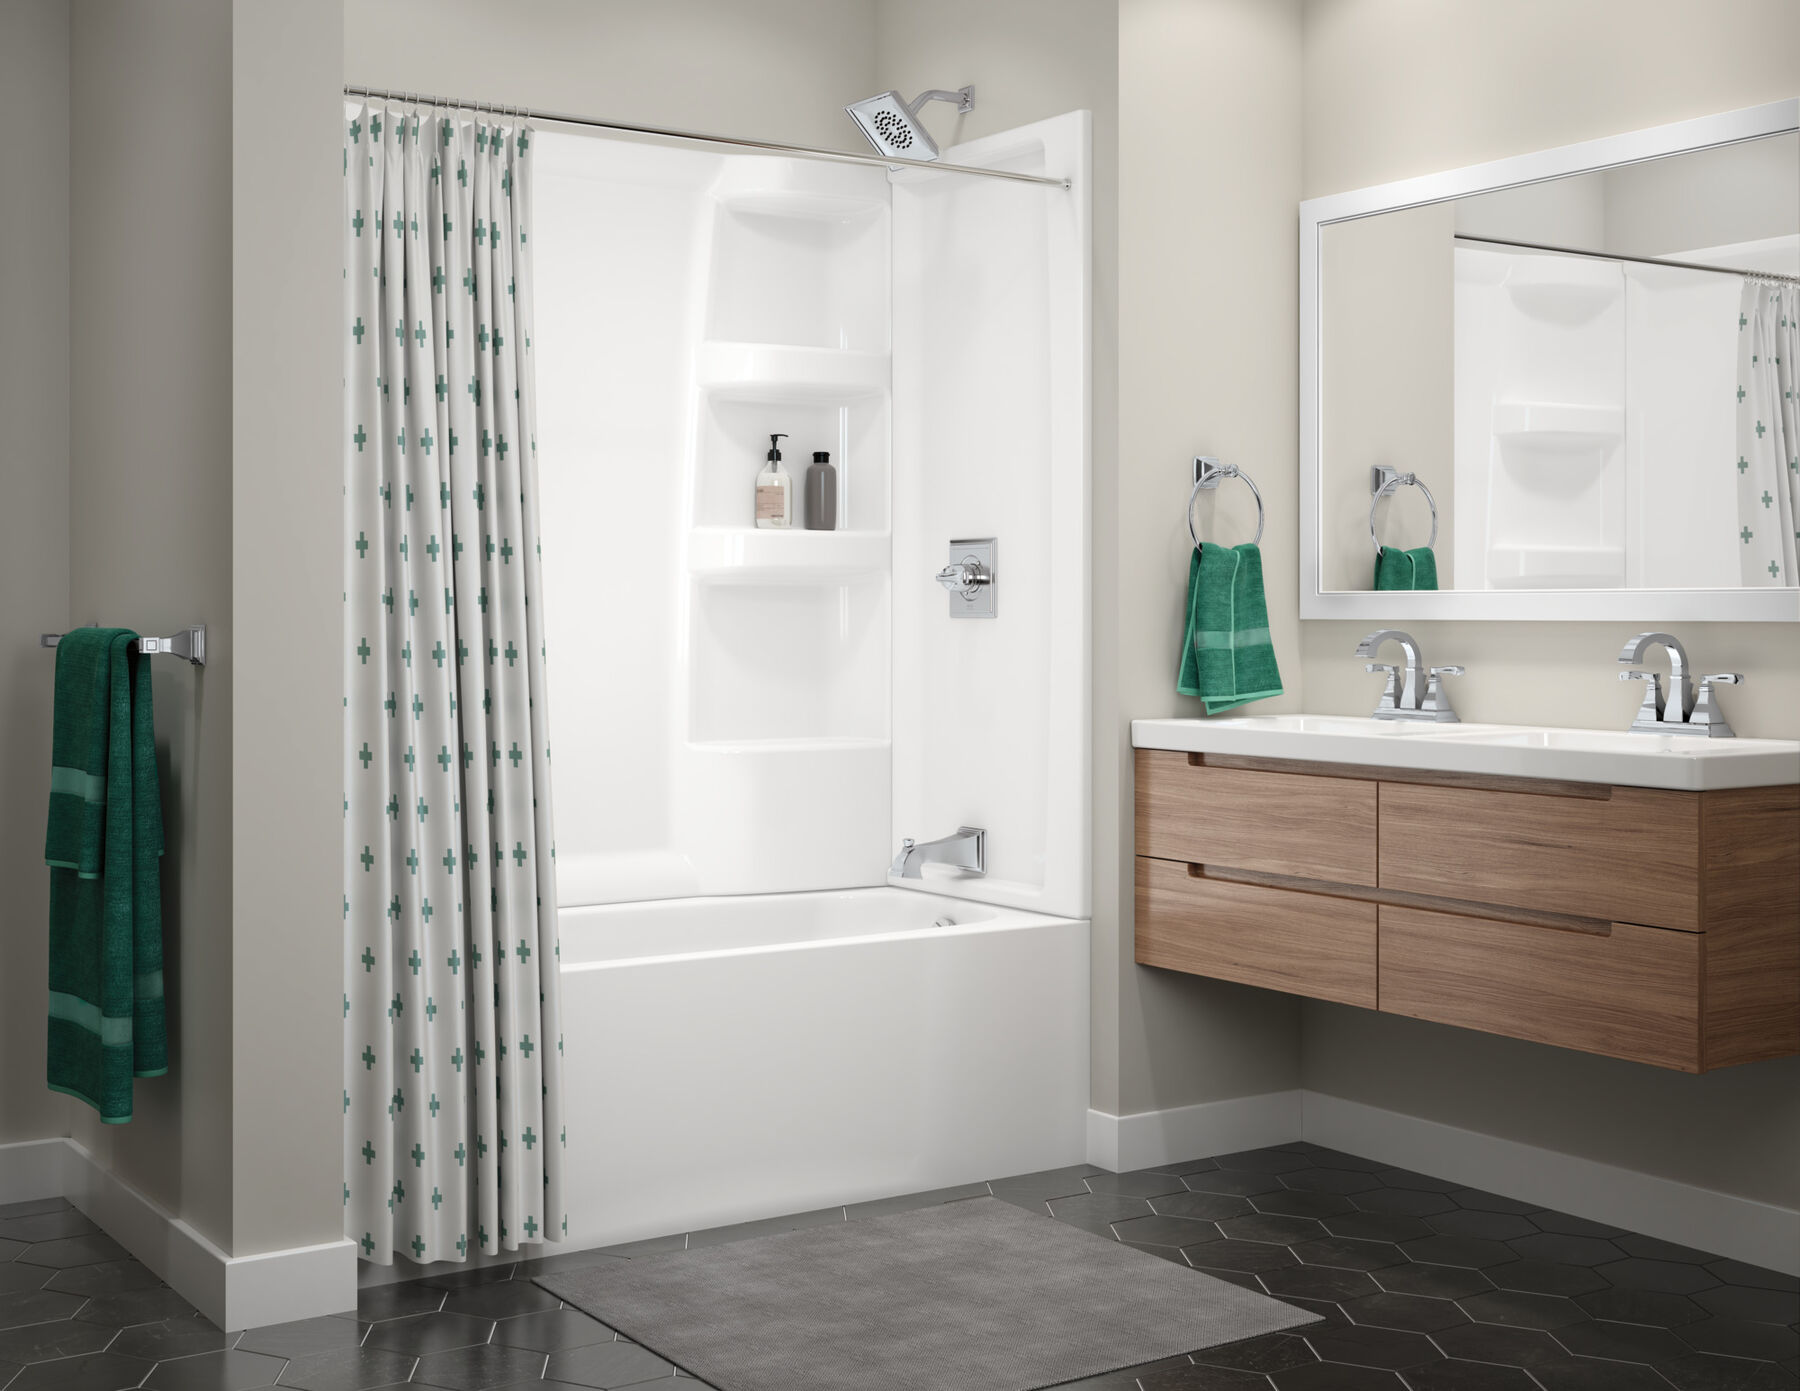 Transitions Kitchens and Baths – Make the Most of Your Bathroom Walls